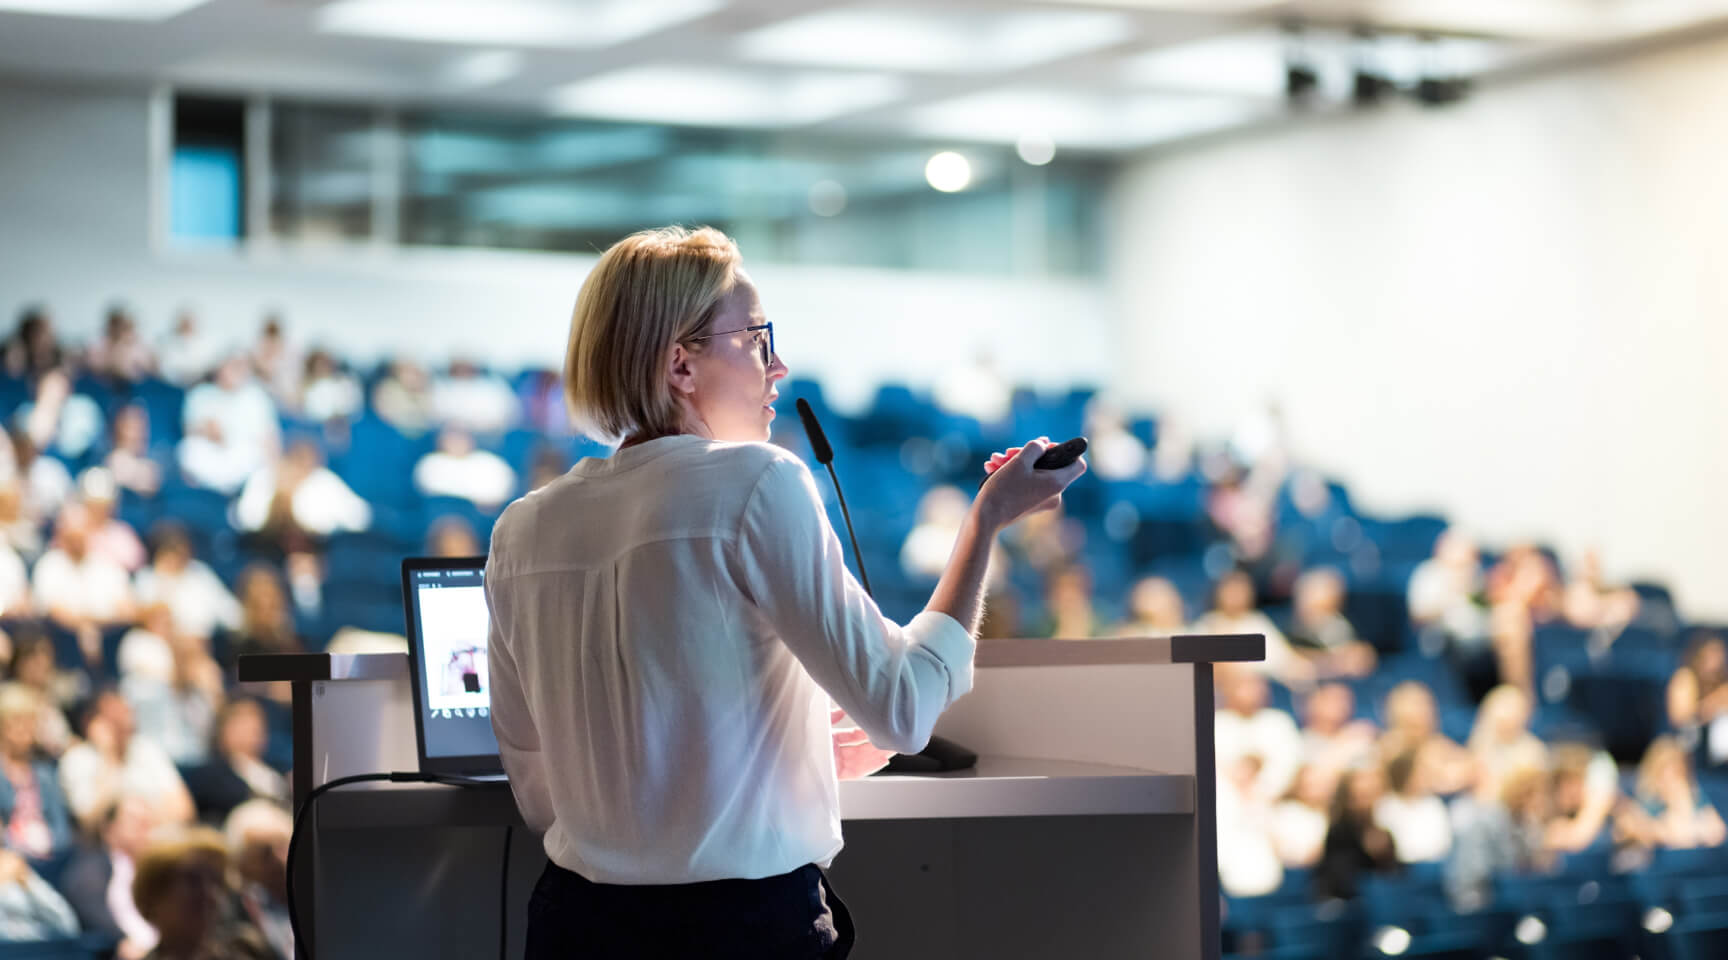 Speaker giving presentation in a lecture hall